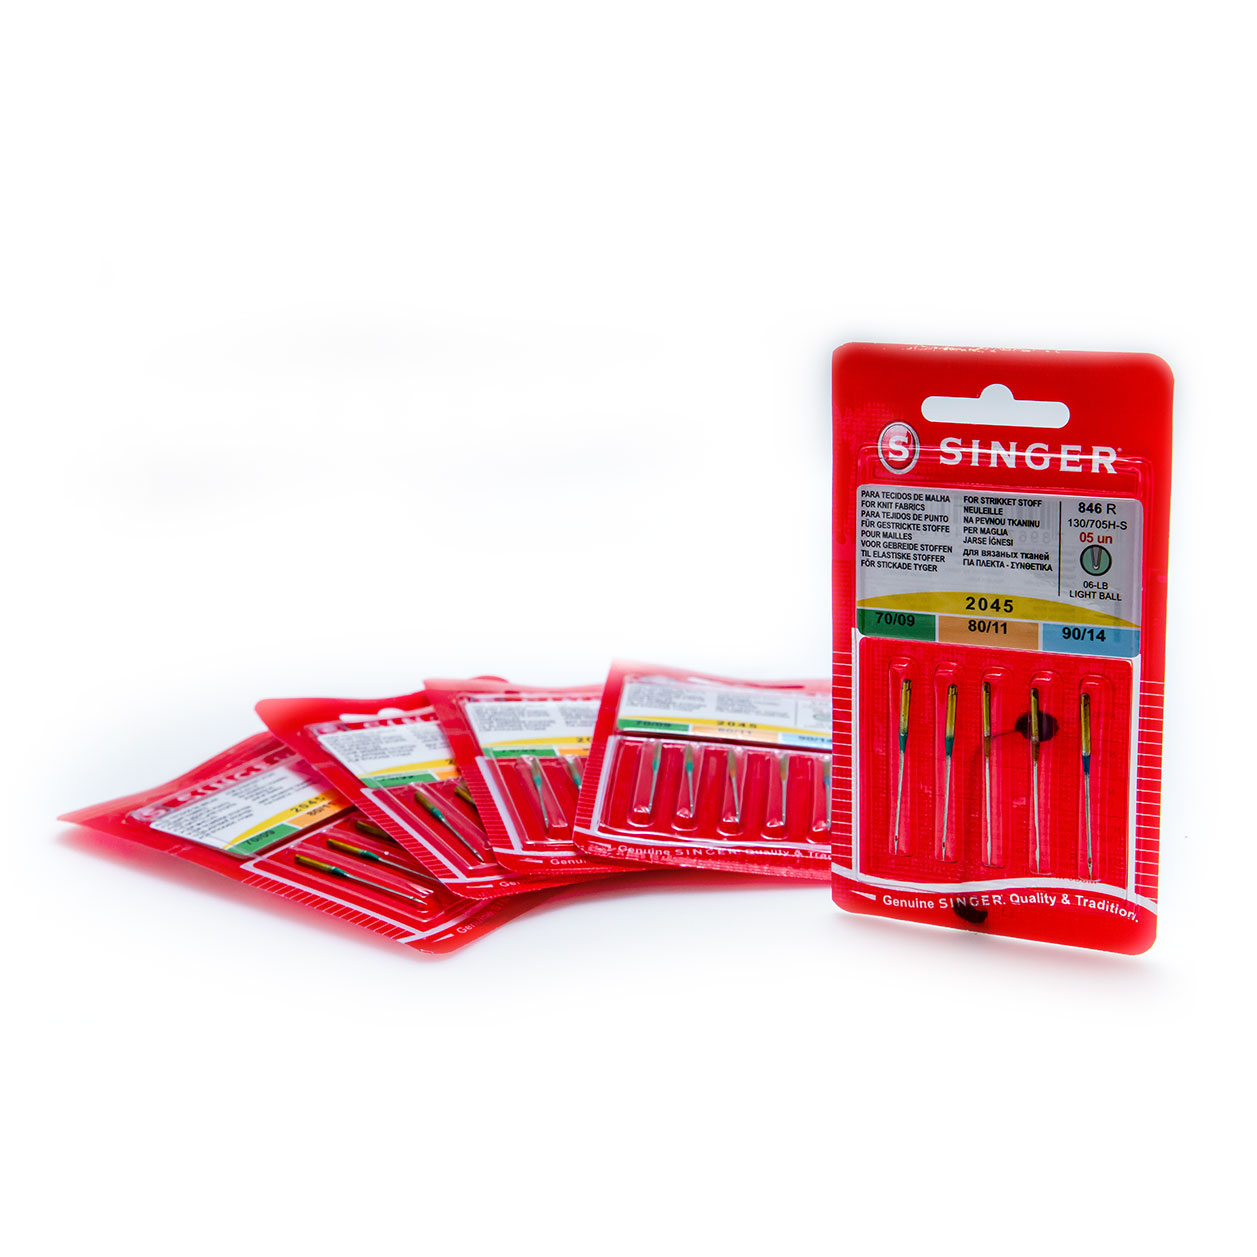 Singer 2045 Needle Blister of 05 units Assorted